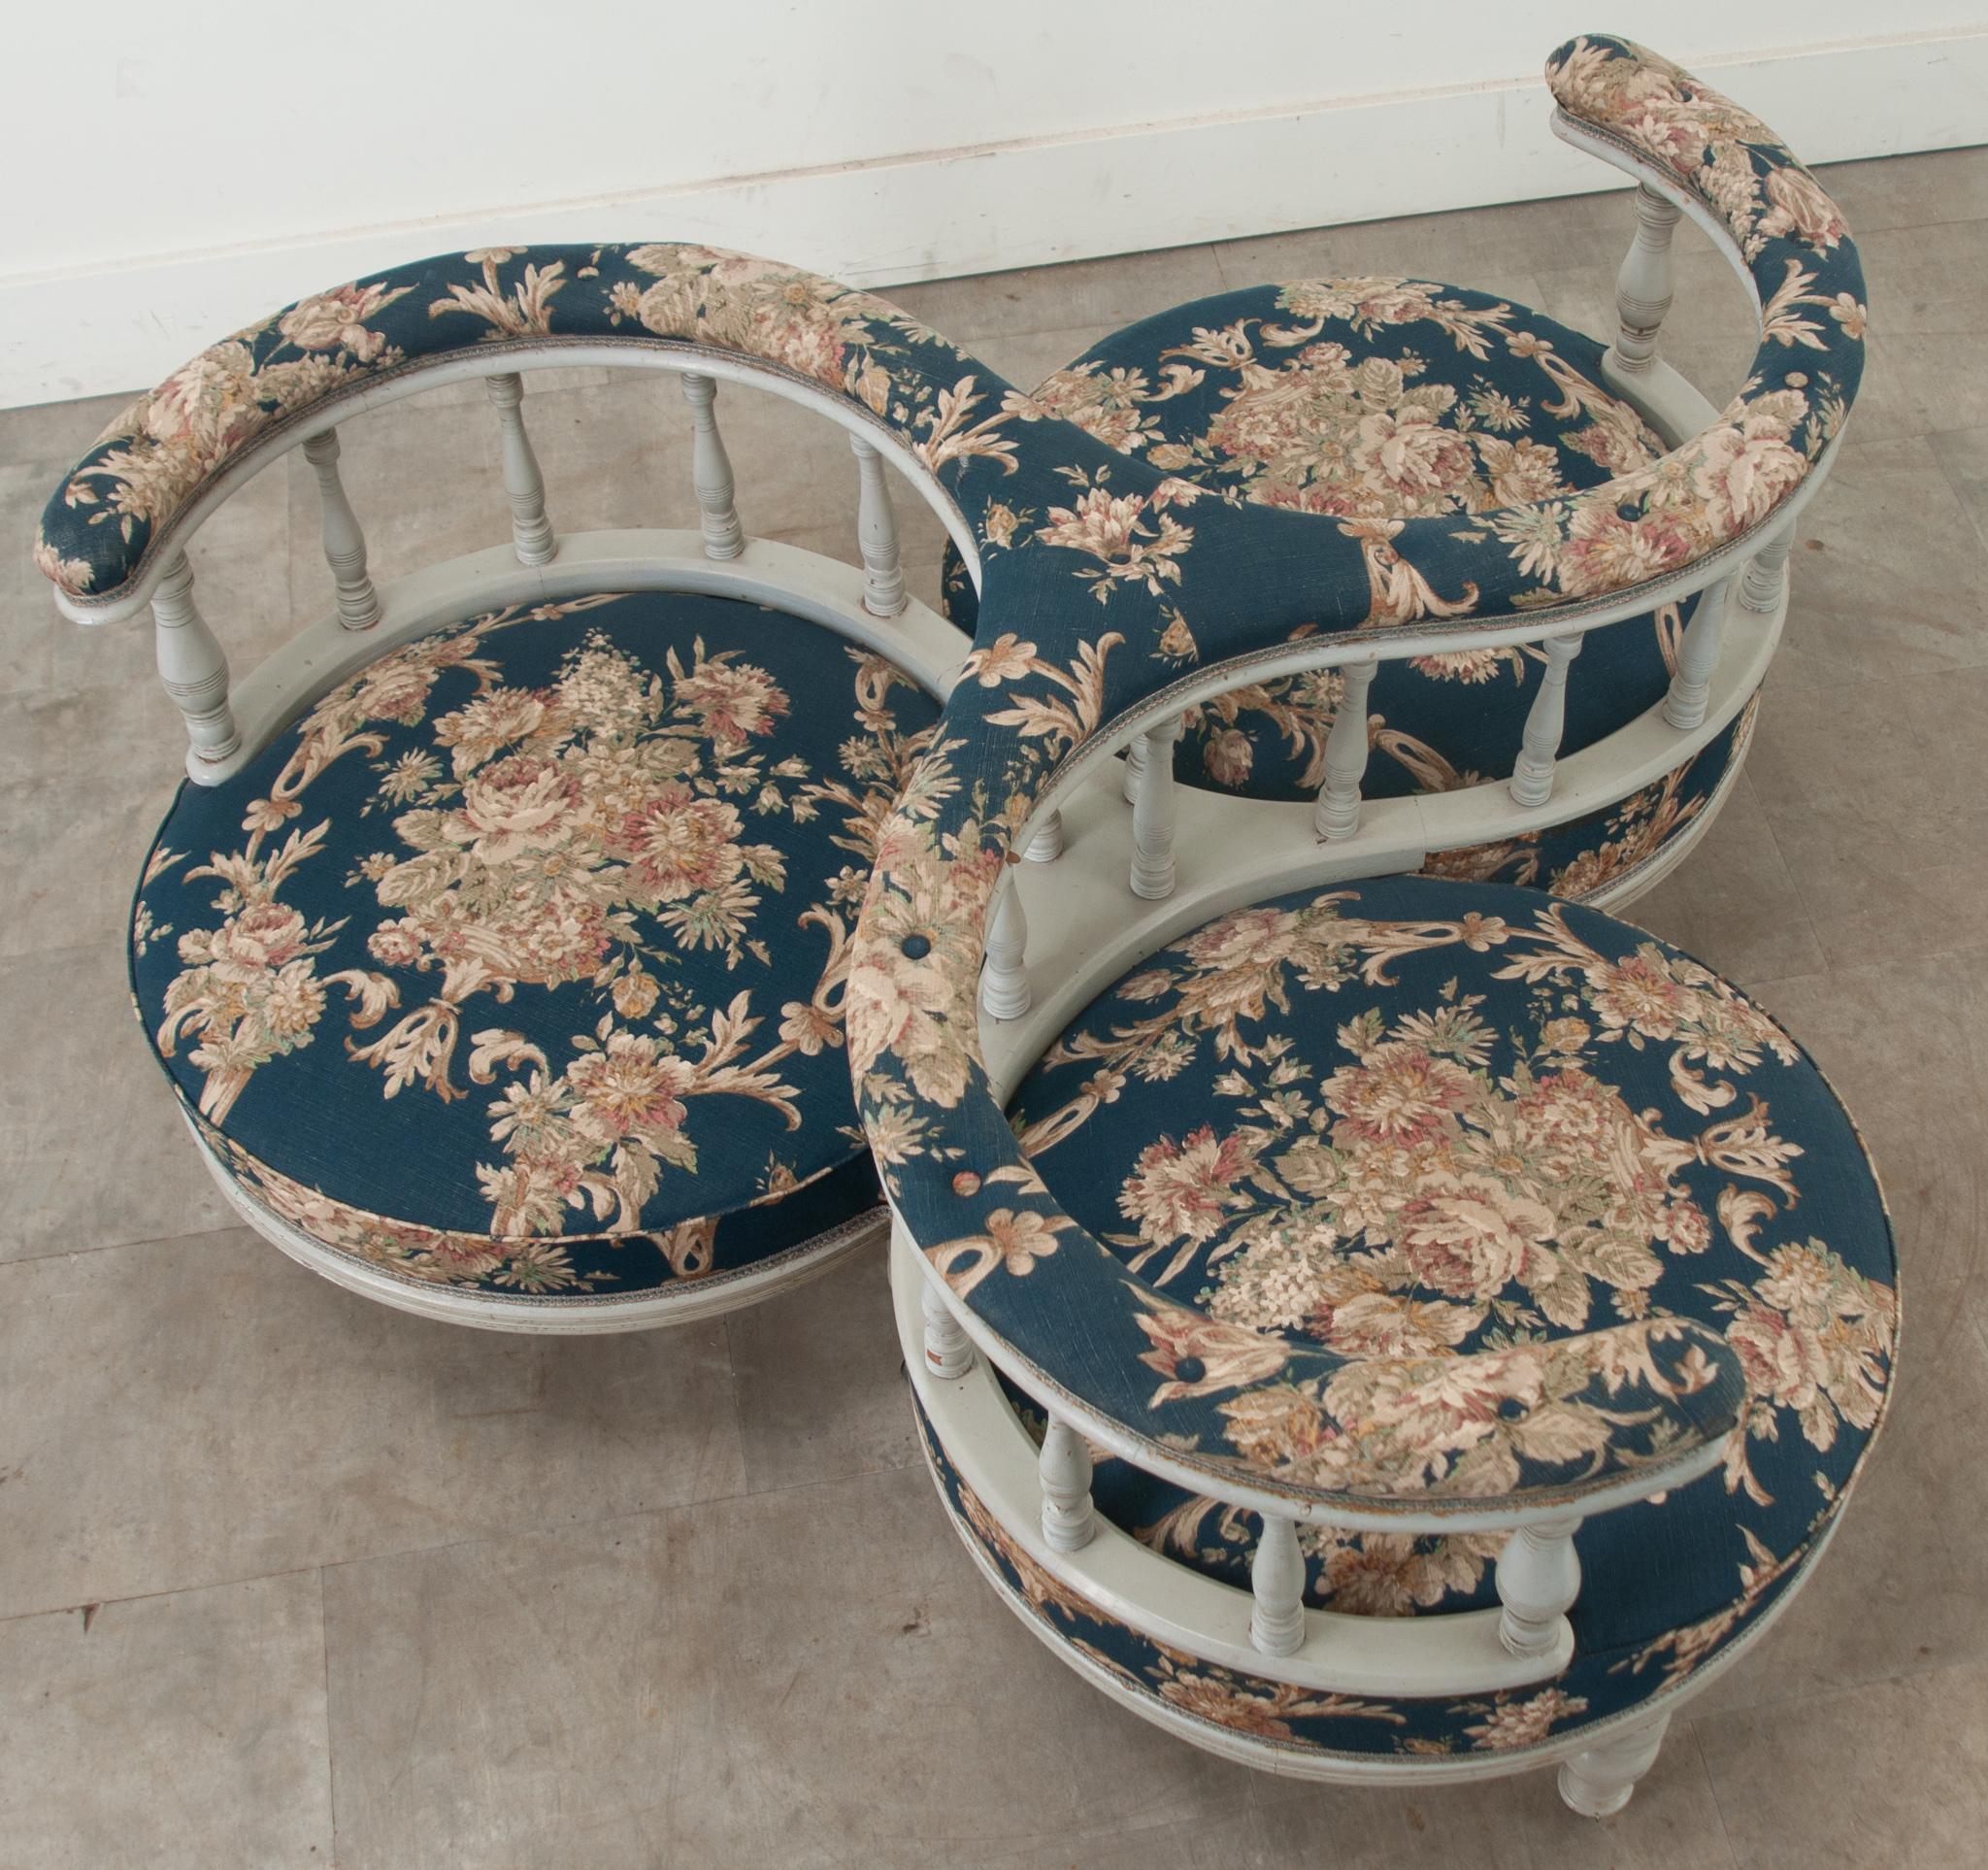 An interesting three-seat roundabout indiscret or conversation sofa. There are three curved upholstered and tufted arms on a painted baluster arcade. Over three round, boxed upholstered cushions with a floral pattern. The whole over six turned and